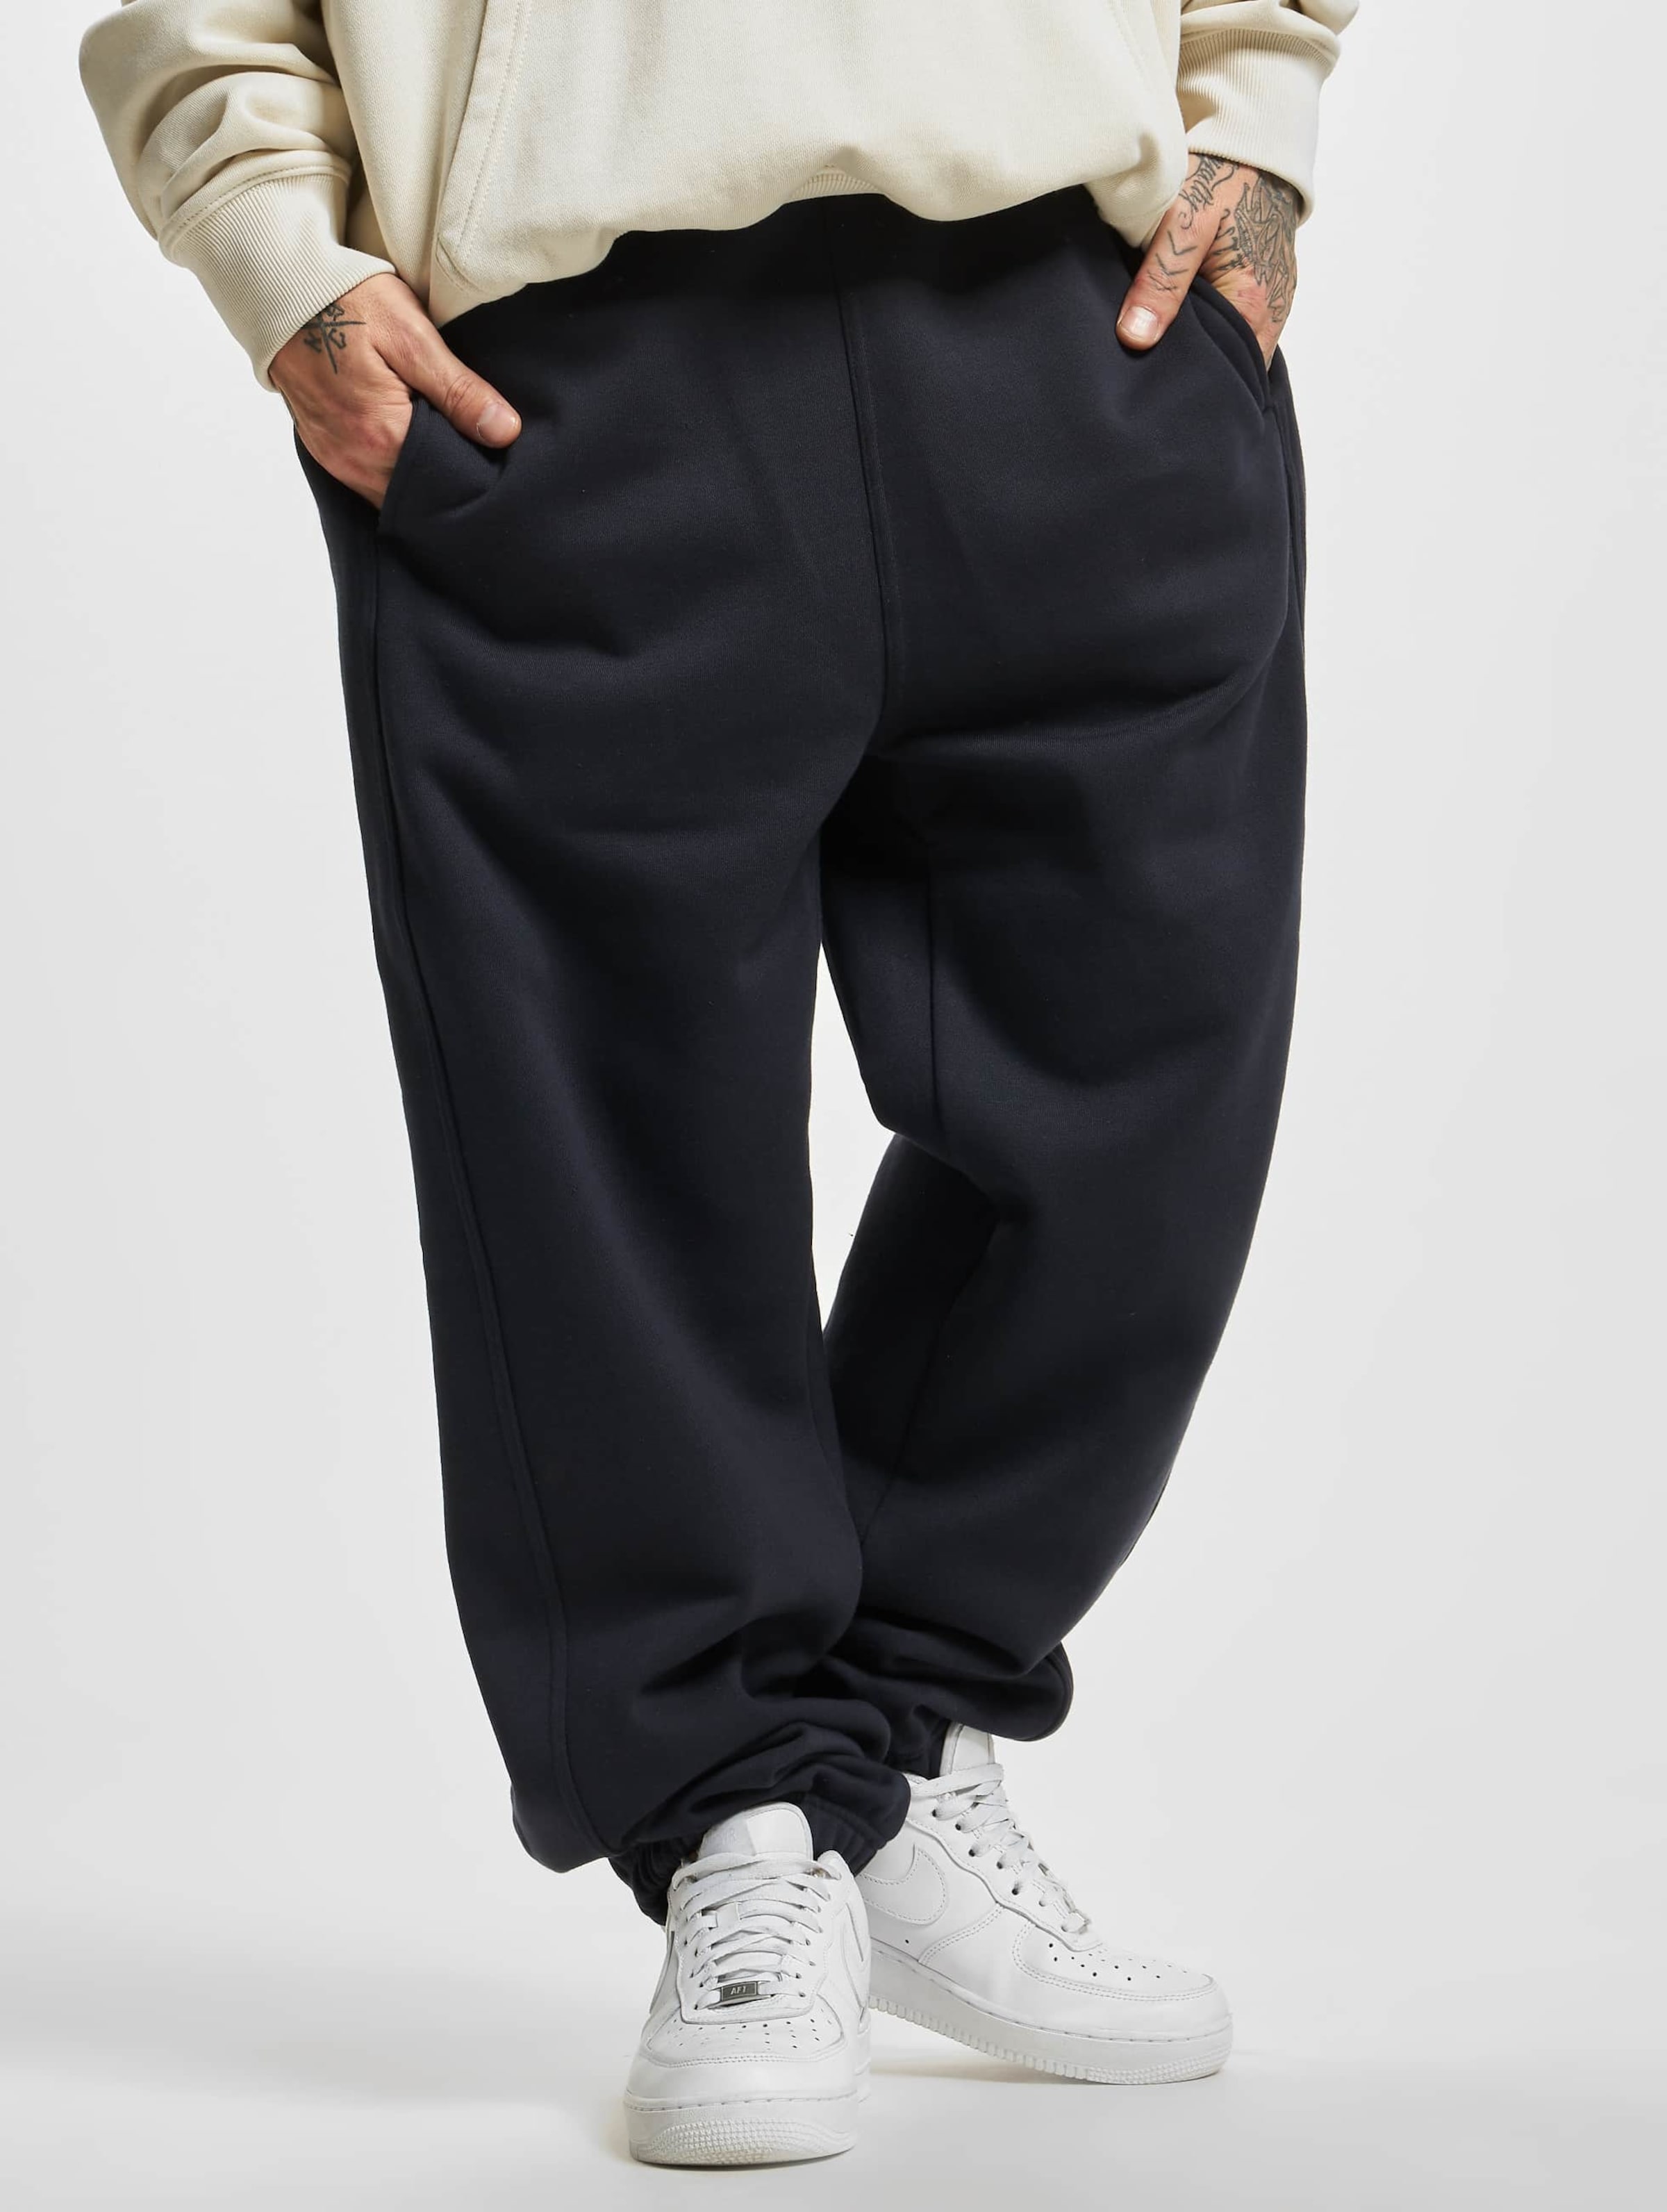 Latest Items :F551 Baggy Sweat Pants from Best Form Fitness Gear - Tank Top  | Fitness Gear